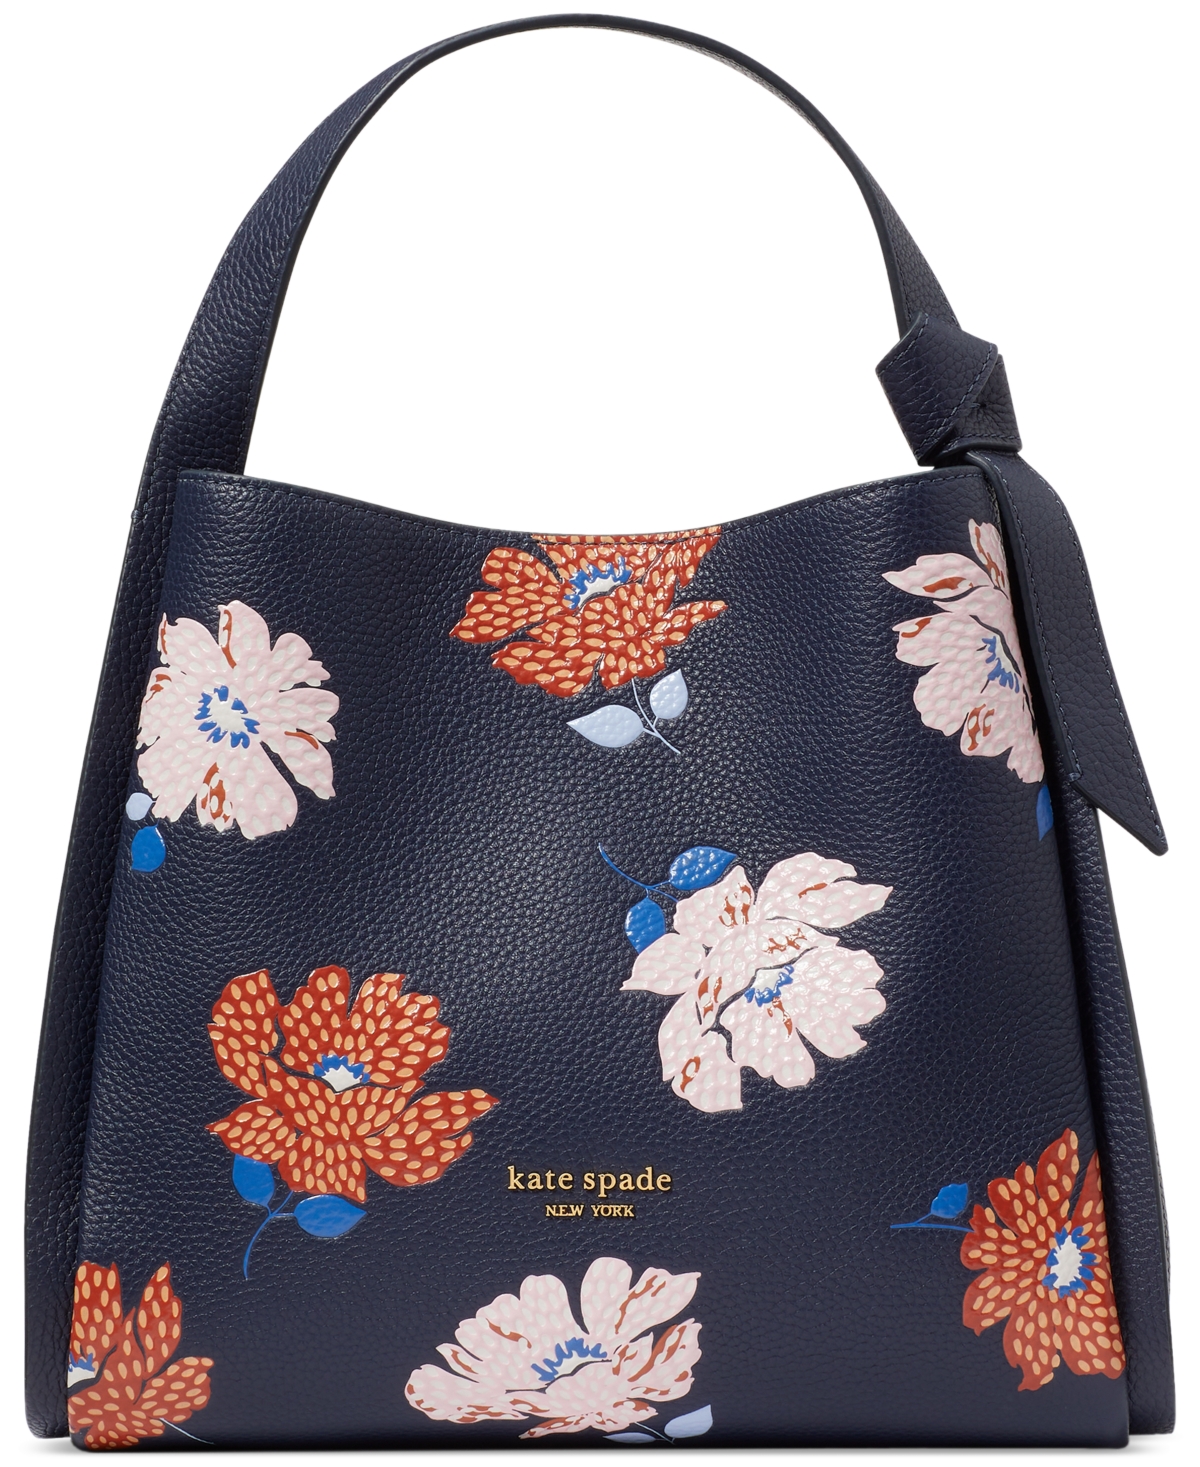 Knott Dotty Floral Embossed Leather Small Crossbody Tote - Parisian Navy Multi